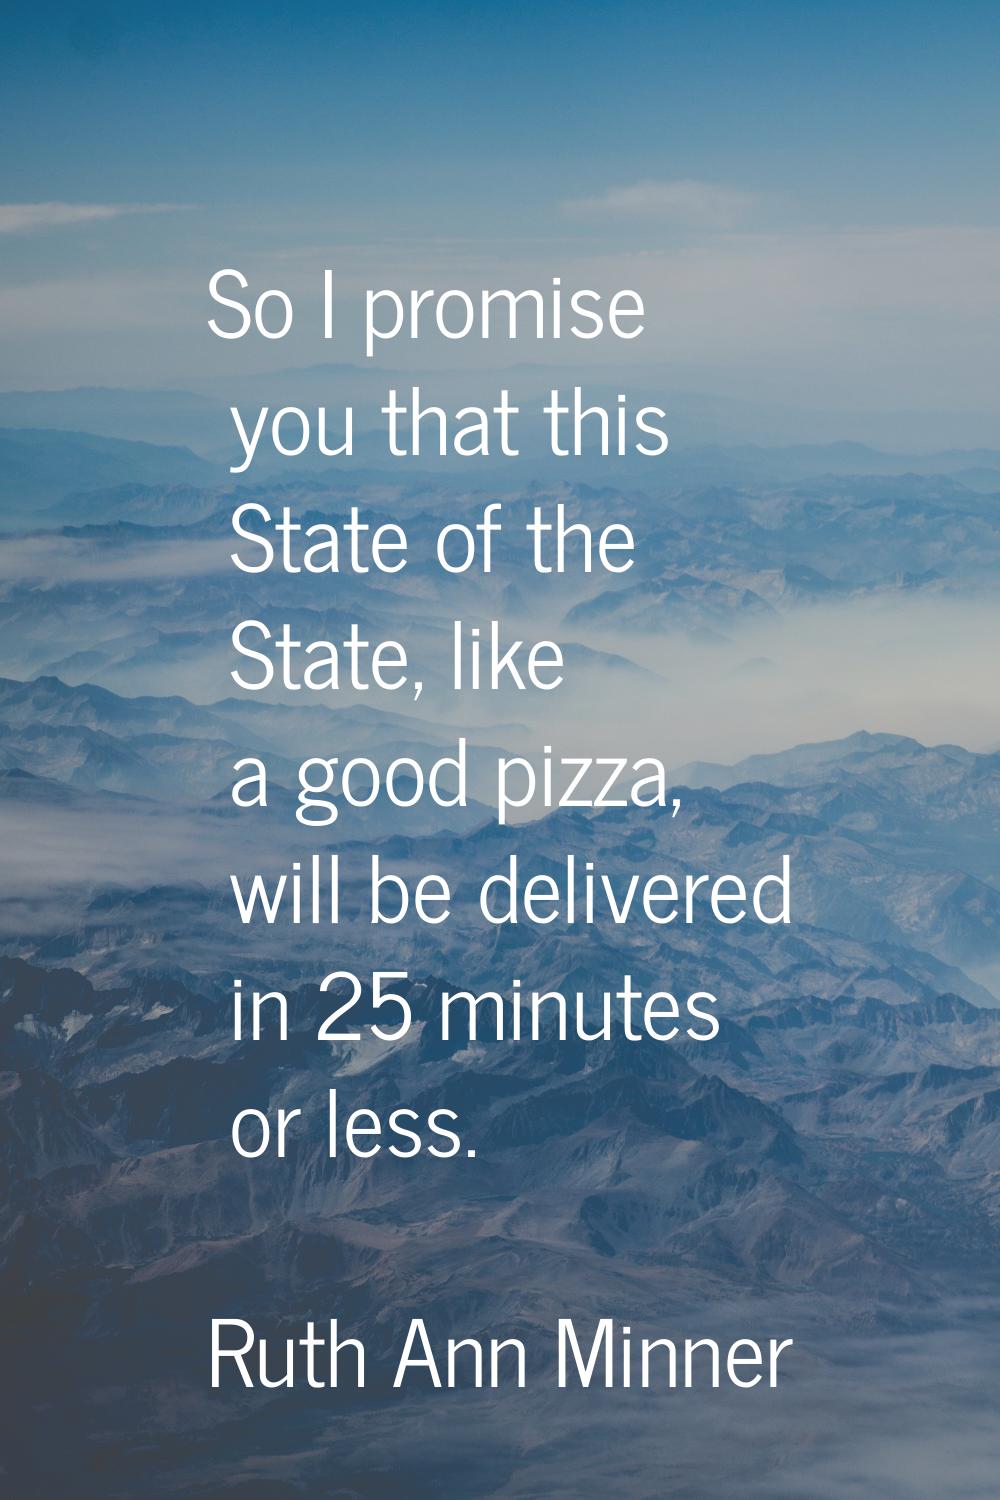 So I promise you that this State of the State, like a good pizza, will be delivered in 25 minutes o